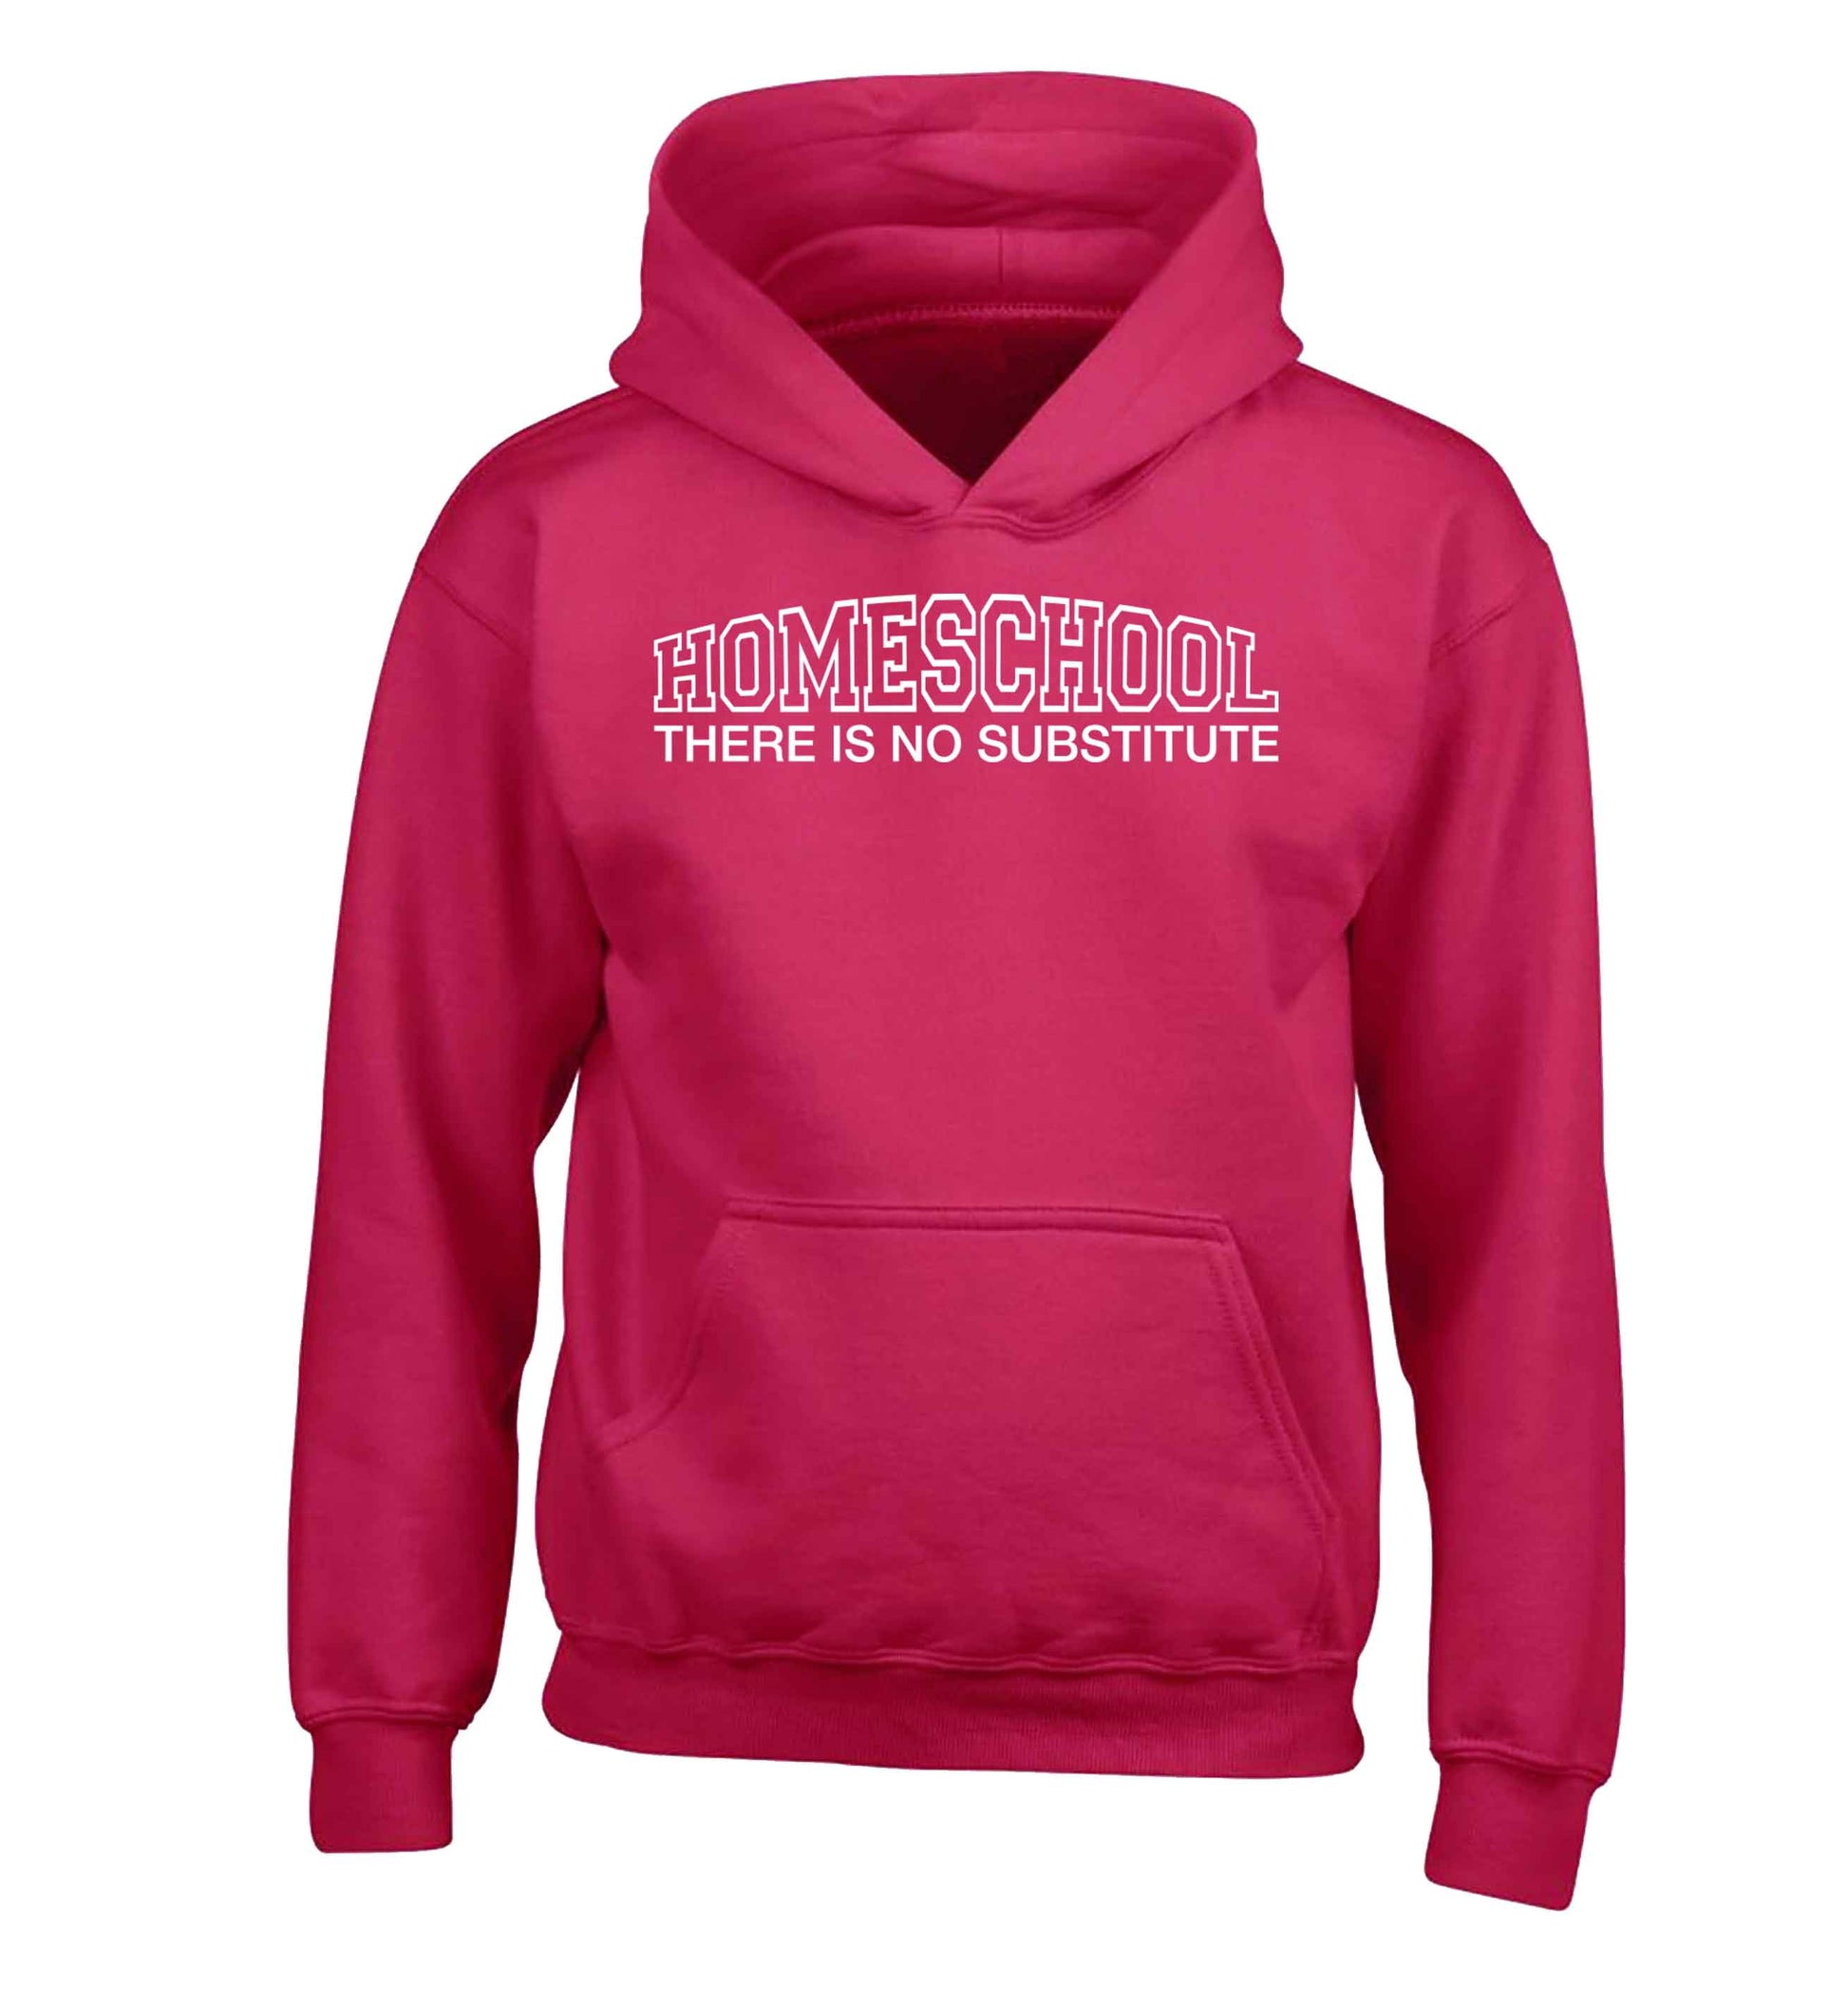 Homeschool there is not substitute children's pink hoodie 12-13 Years